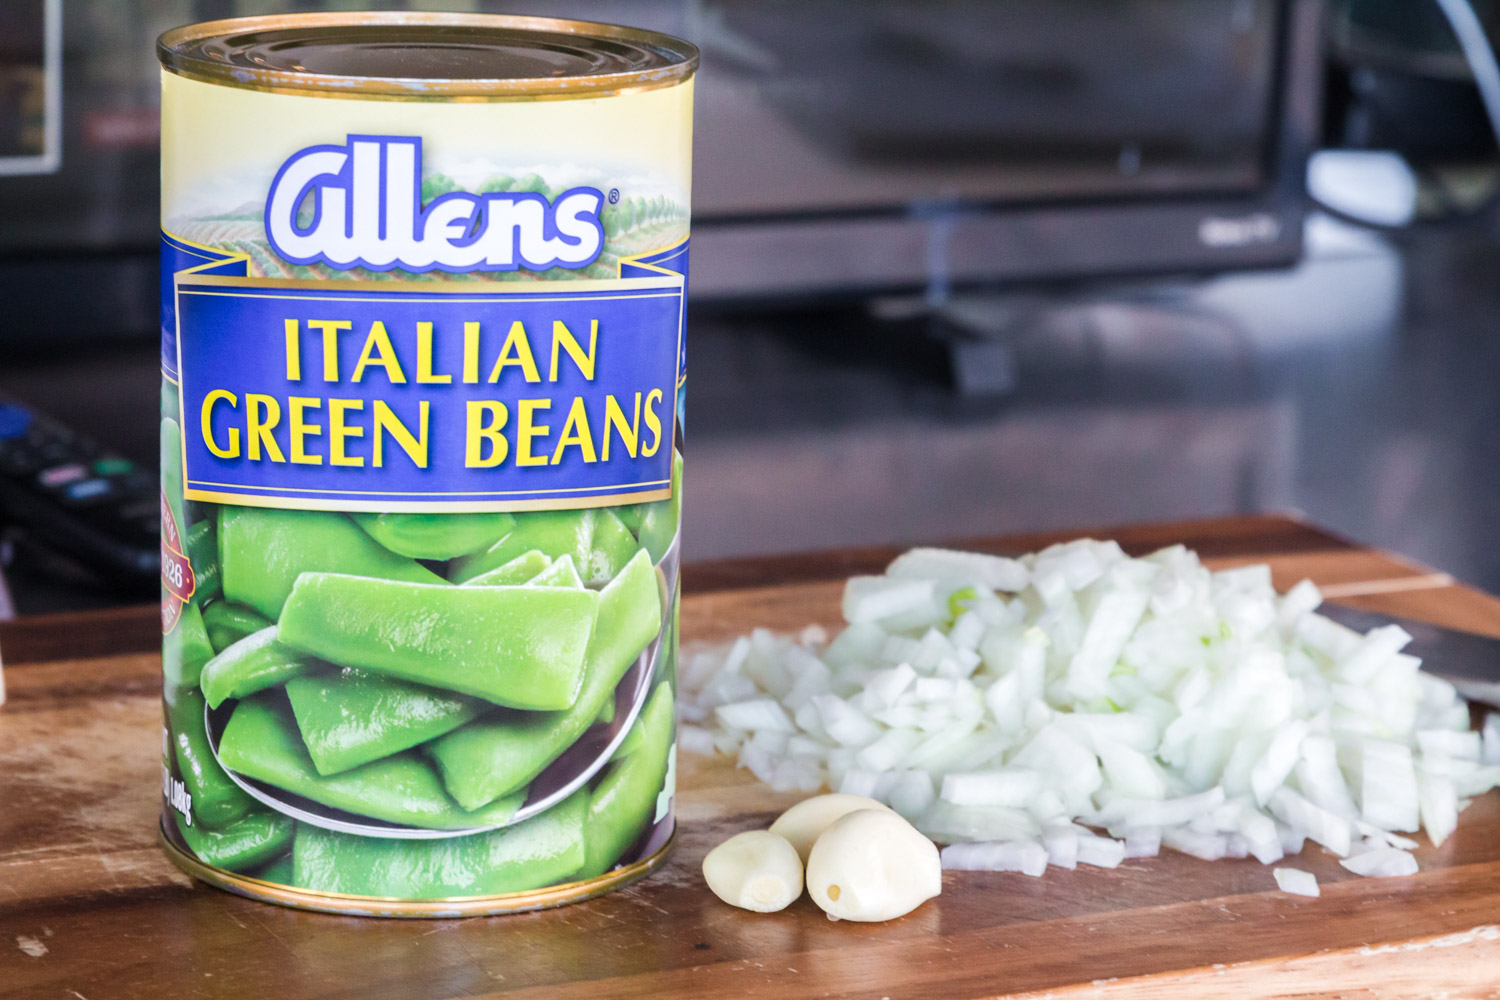 A can of Italian Green Beans